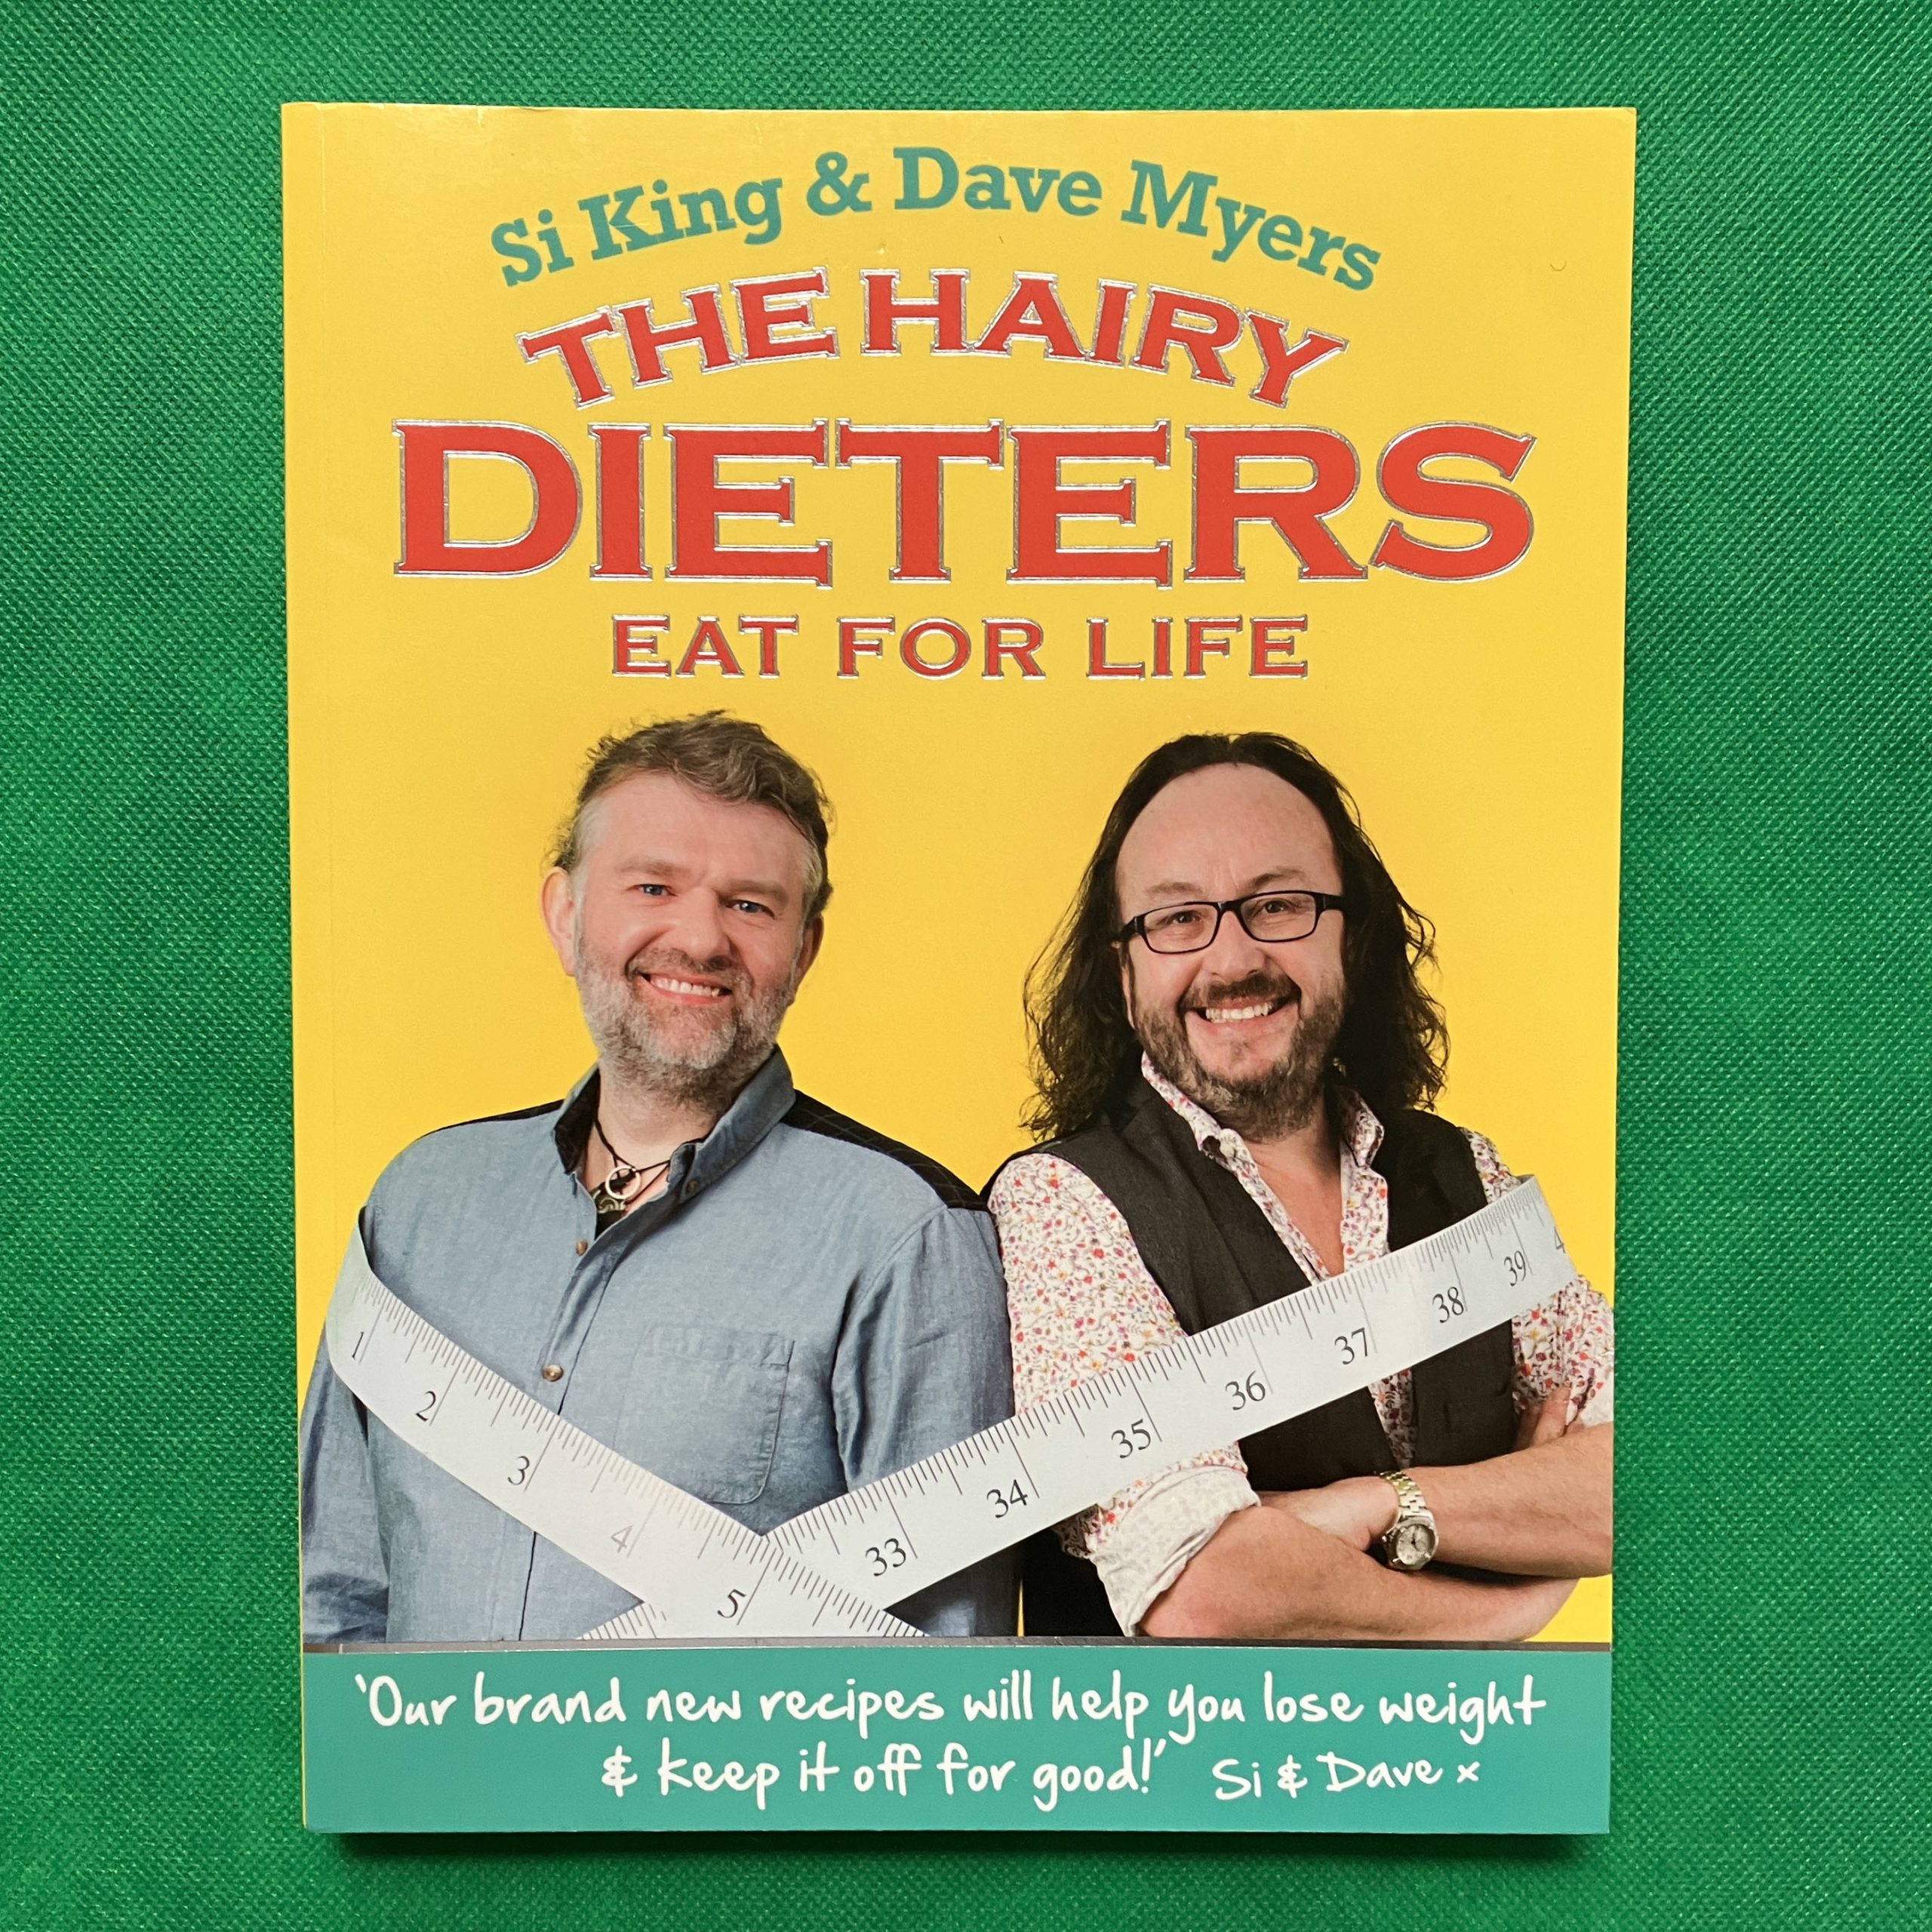 The Hairy Dieters Eat for Life